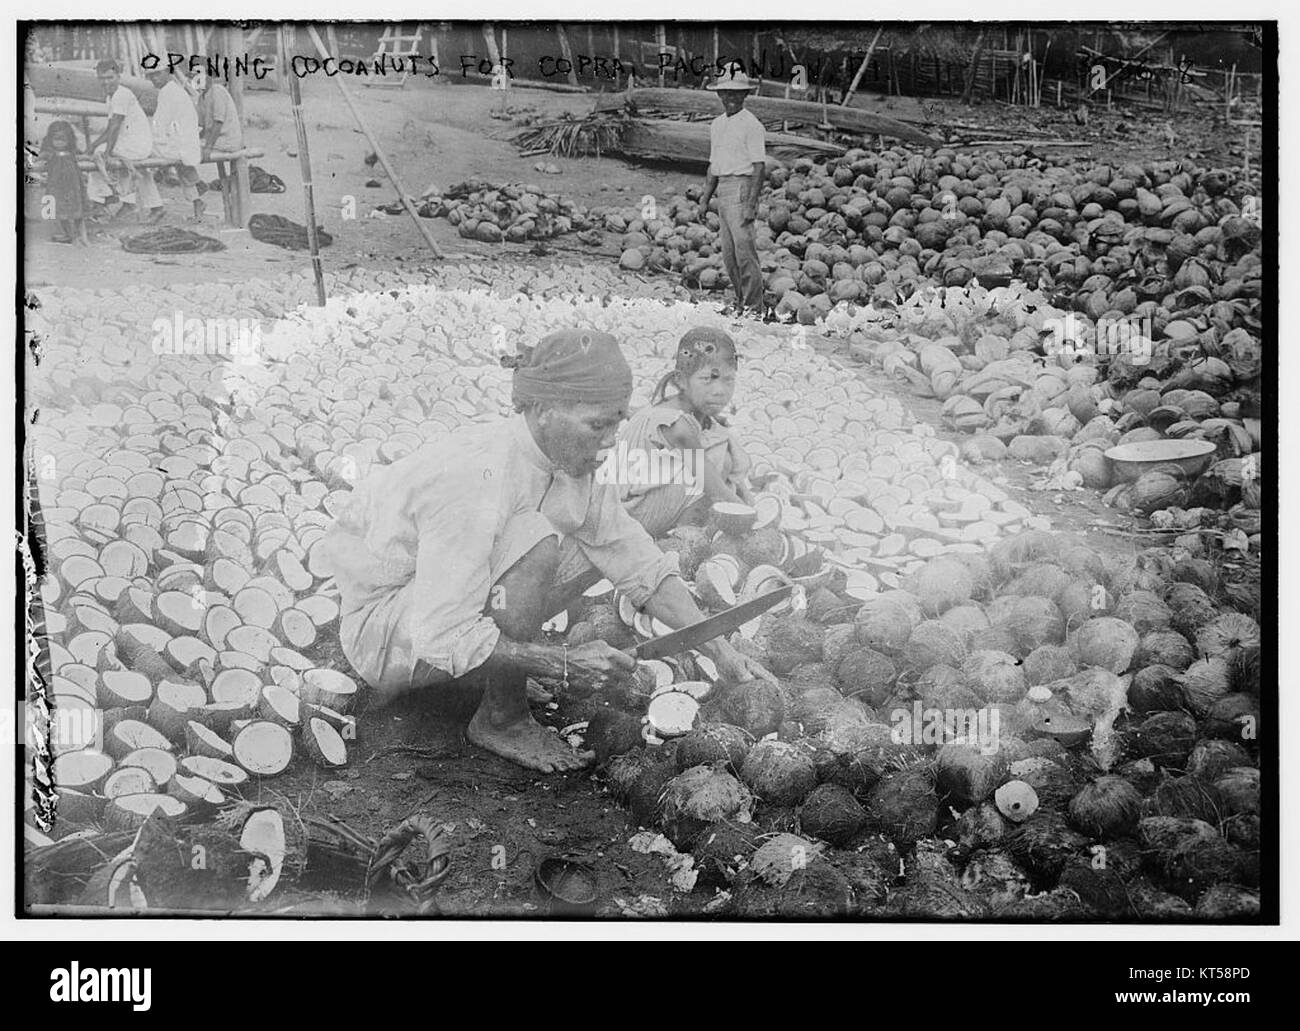 Opening Coconuts for Copra, Pagsanjan, P.I.  (14516296051) Stock Photo